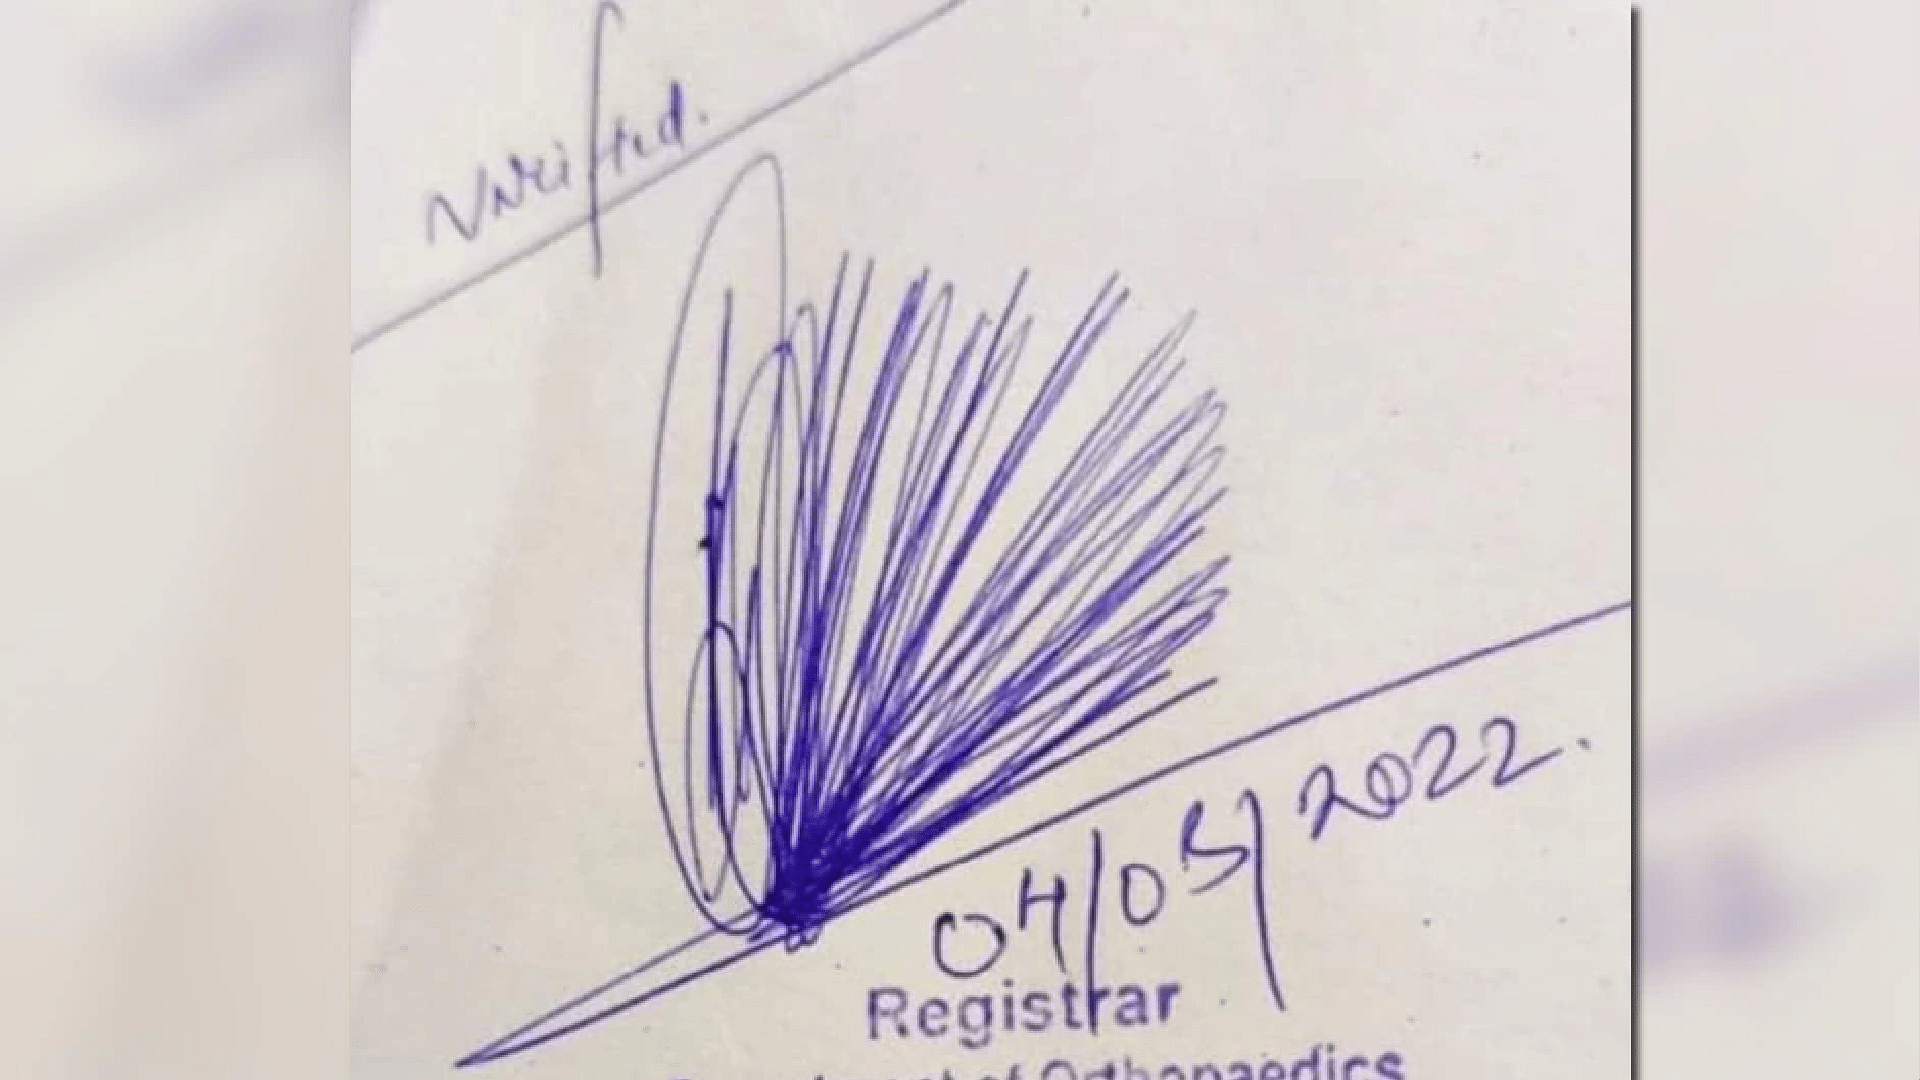 Weird Signature going viral on internet you would not have seen such a peacock-like signature